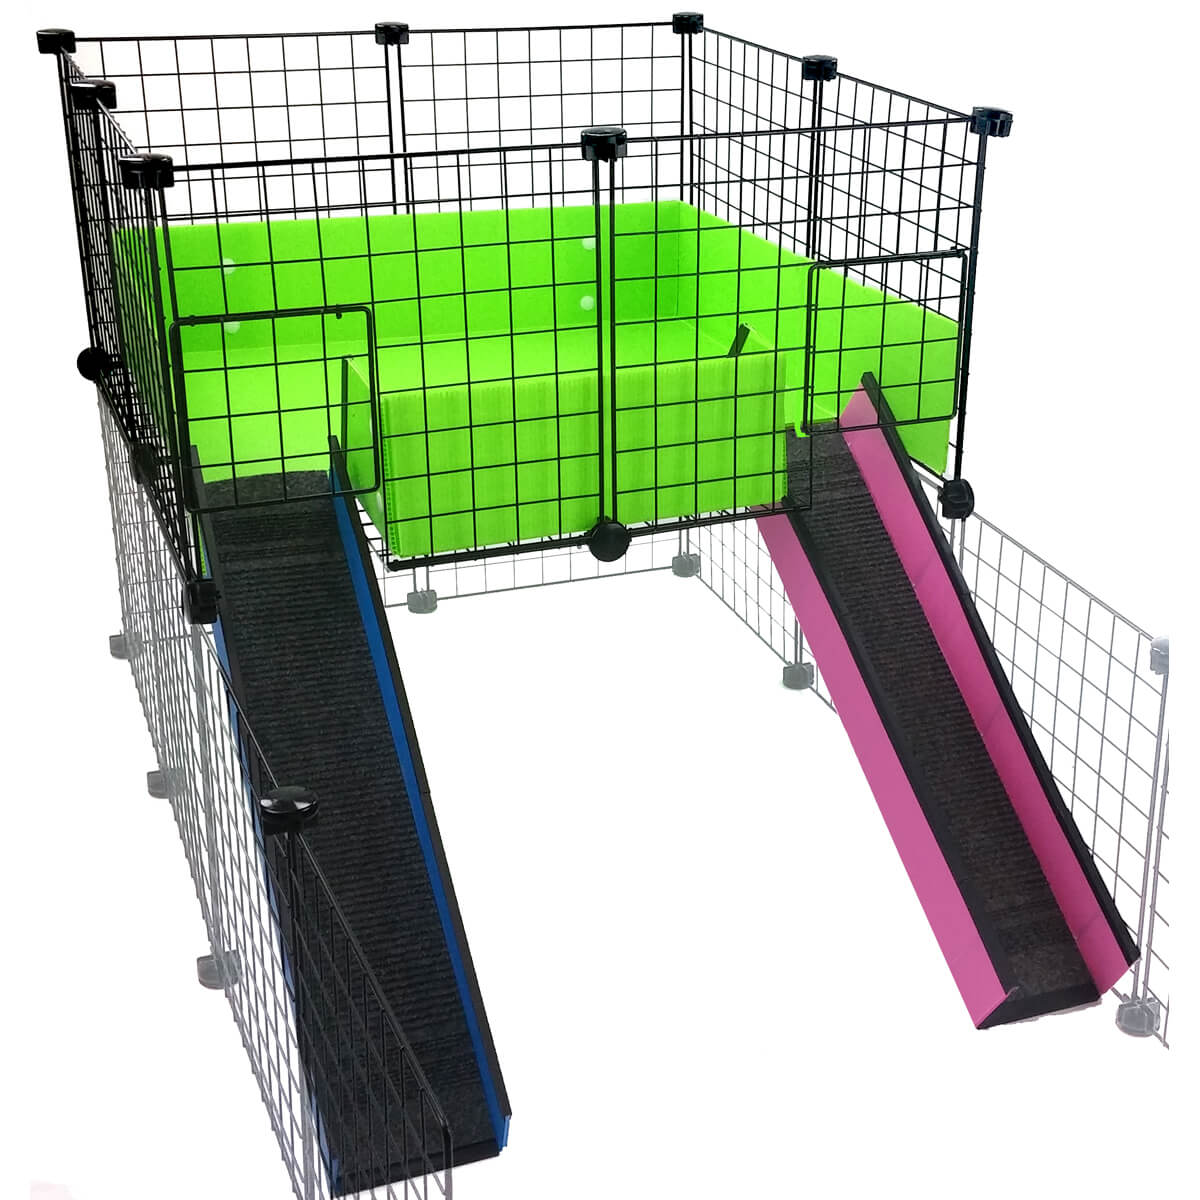 Lime Loop Loft with colorful ramps and optional mini grids designed for a C&C guinea pig cage